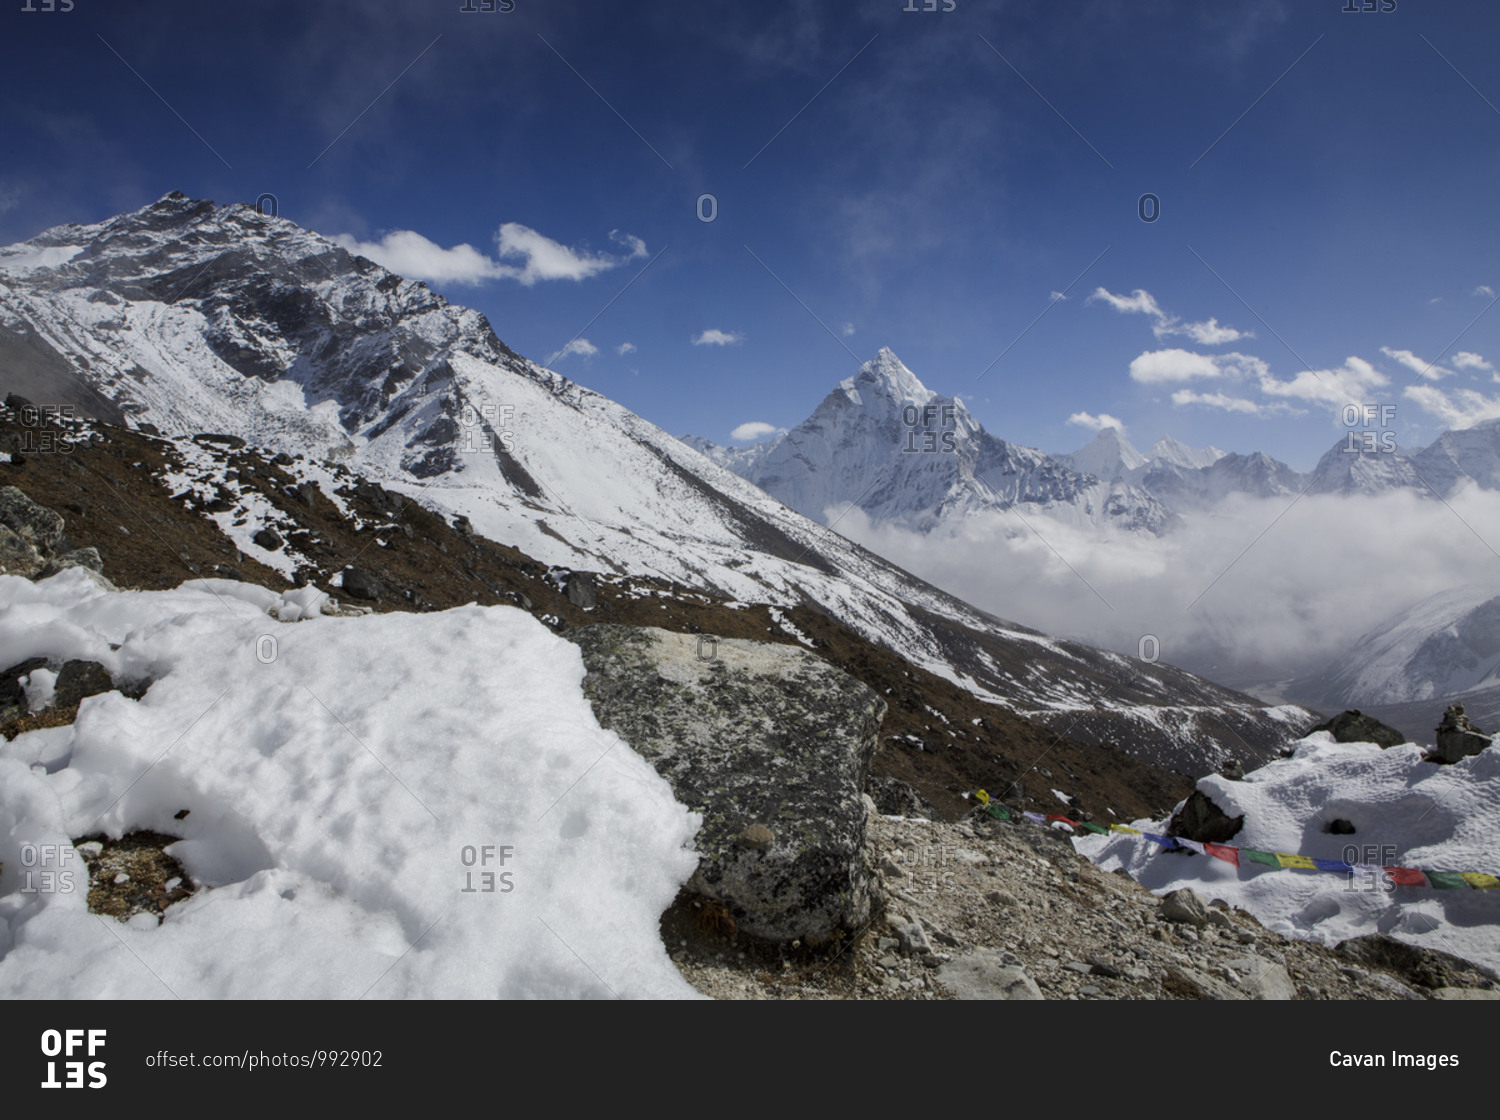 Ama Dablam seen from the trail to Everest Base Camp in Nepal.